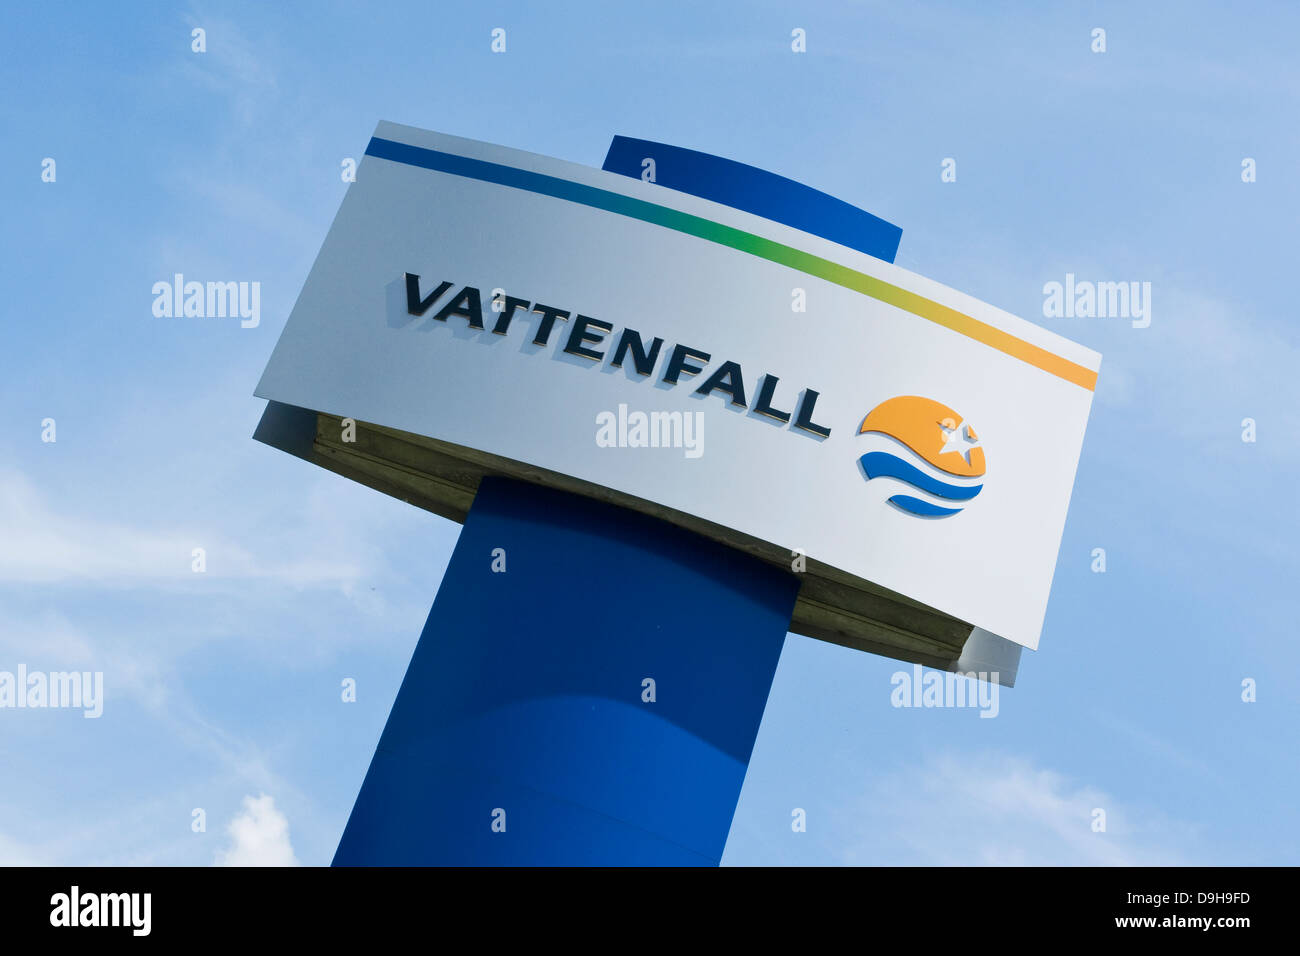 Vattenfall name plate in the location in Brunsbuttel, Vattenfall company sign At the location in Brunsbuttel, Stock Photo